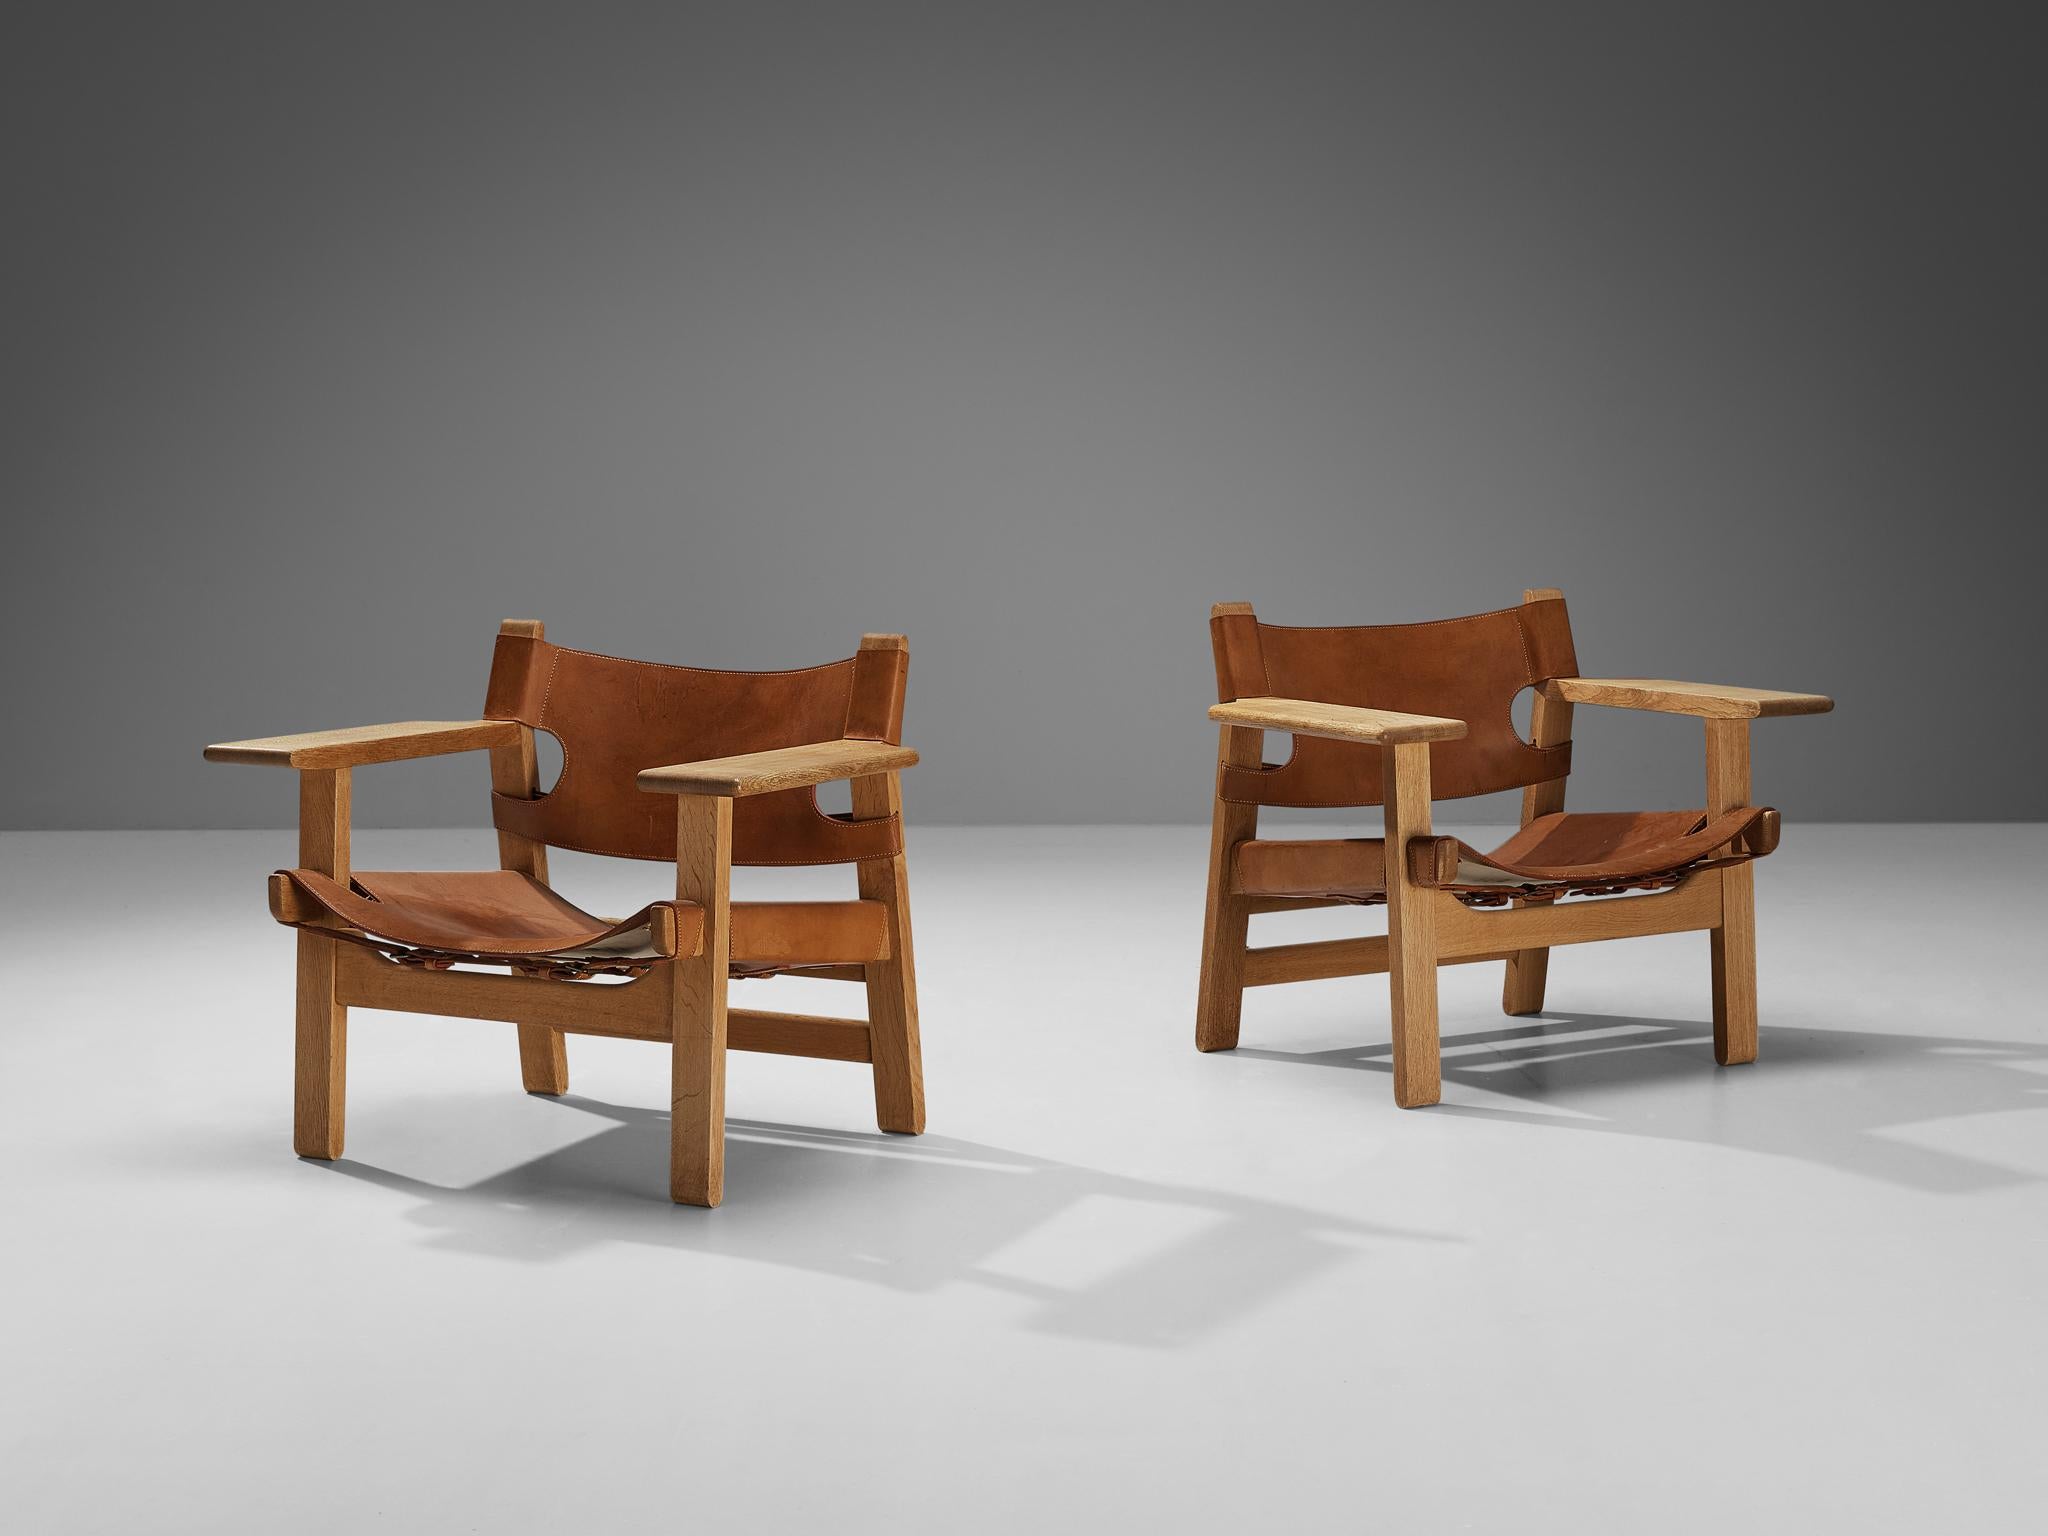 Børge Mogensen for Fredericia Stolefabrik, pair of 'Spanish Chairs,' oak, leather, brass, Denmark, design 1958

This well-known design by Børge Mogensen has a very strong appearance. The sincere construction and type of upholstery, give the chair a